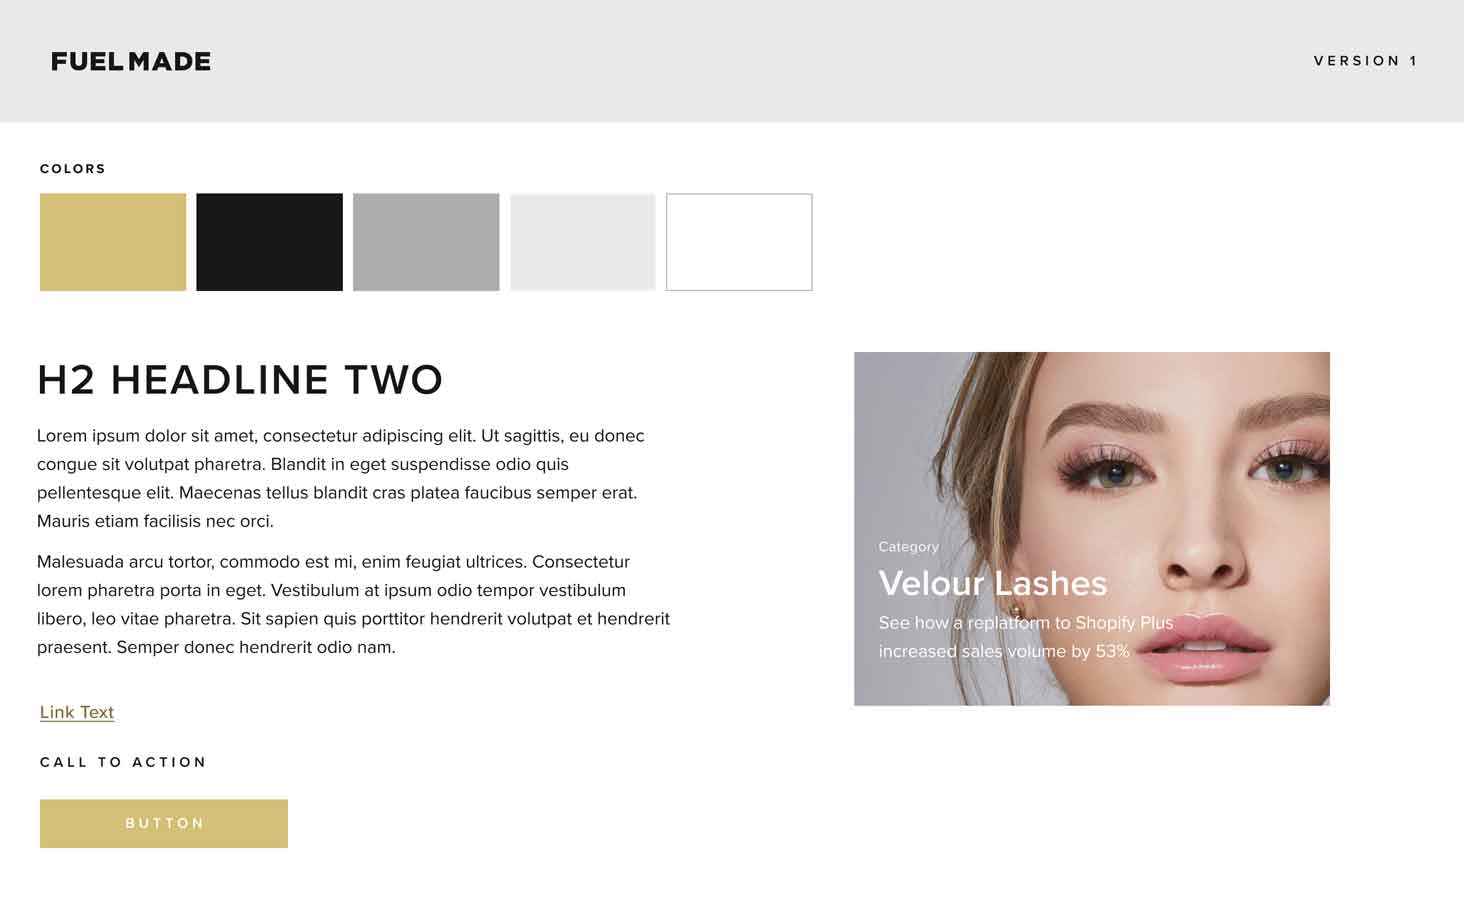 An initial style guide iteration showing a possible color palette, font options, and a link card style. The header is light gray with black text, and the fonts are all modern sans-serifs. The link card has white text over an image.